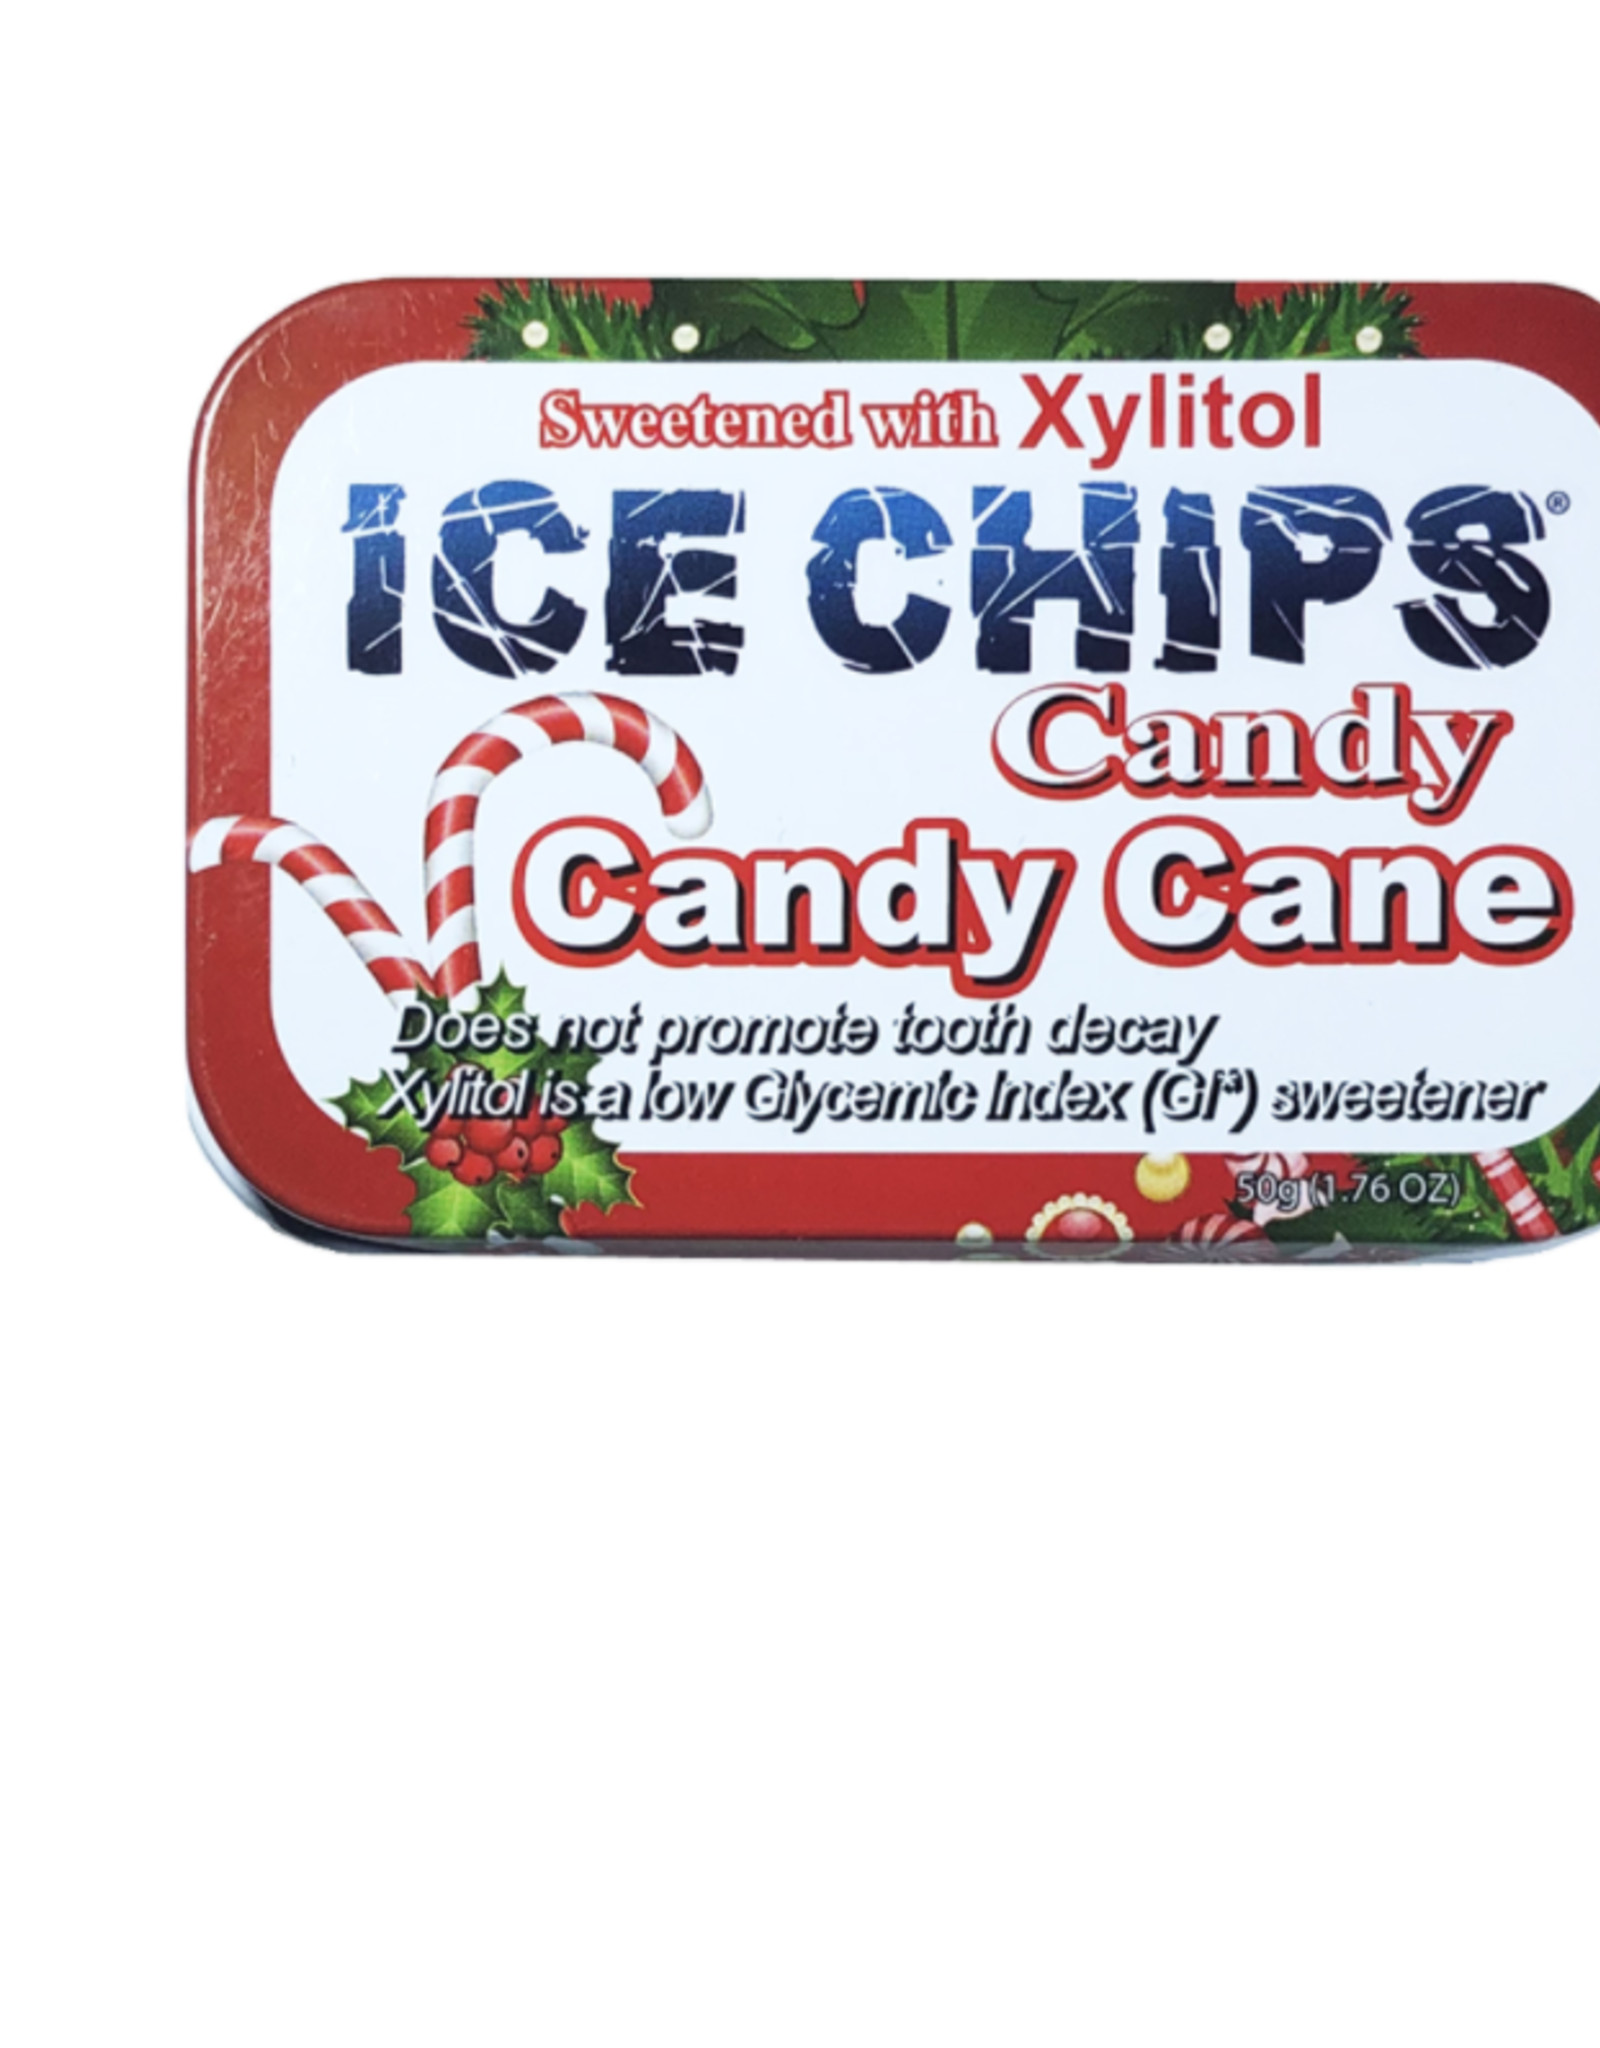 Ice Chips Ice Chips Candy Cane